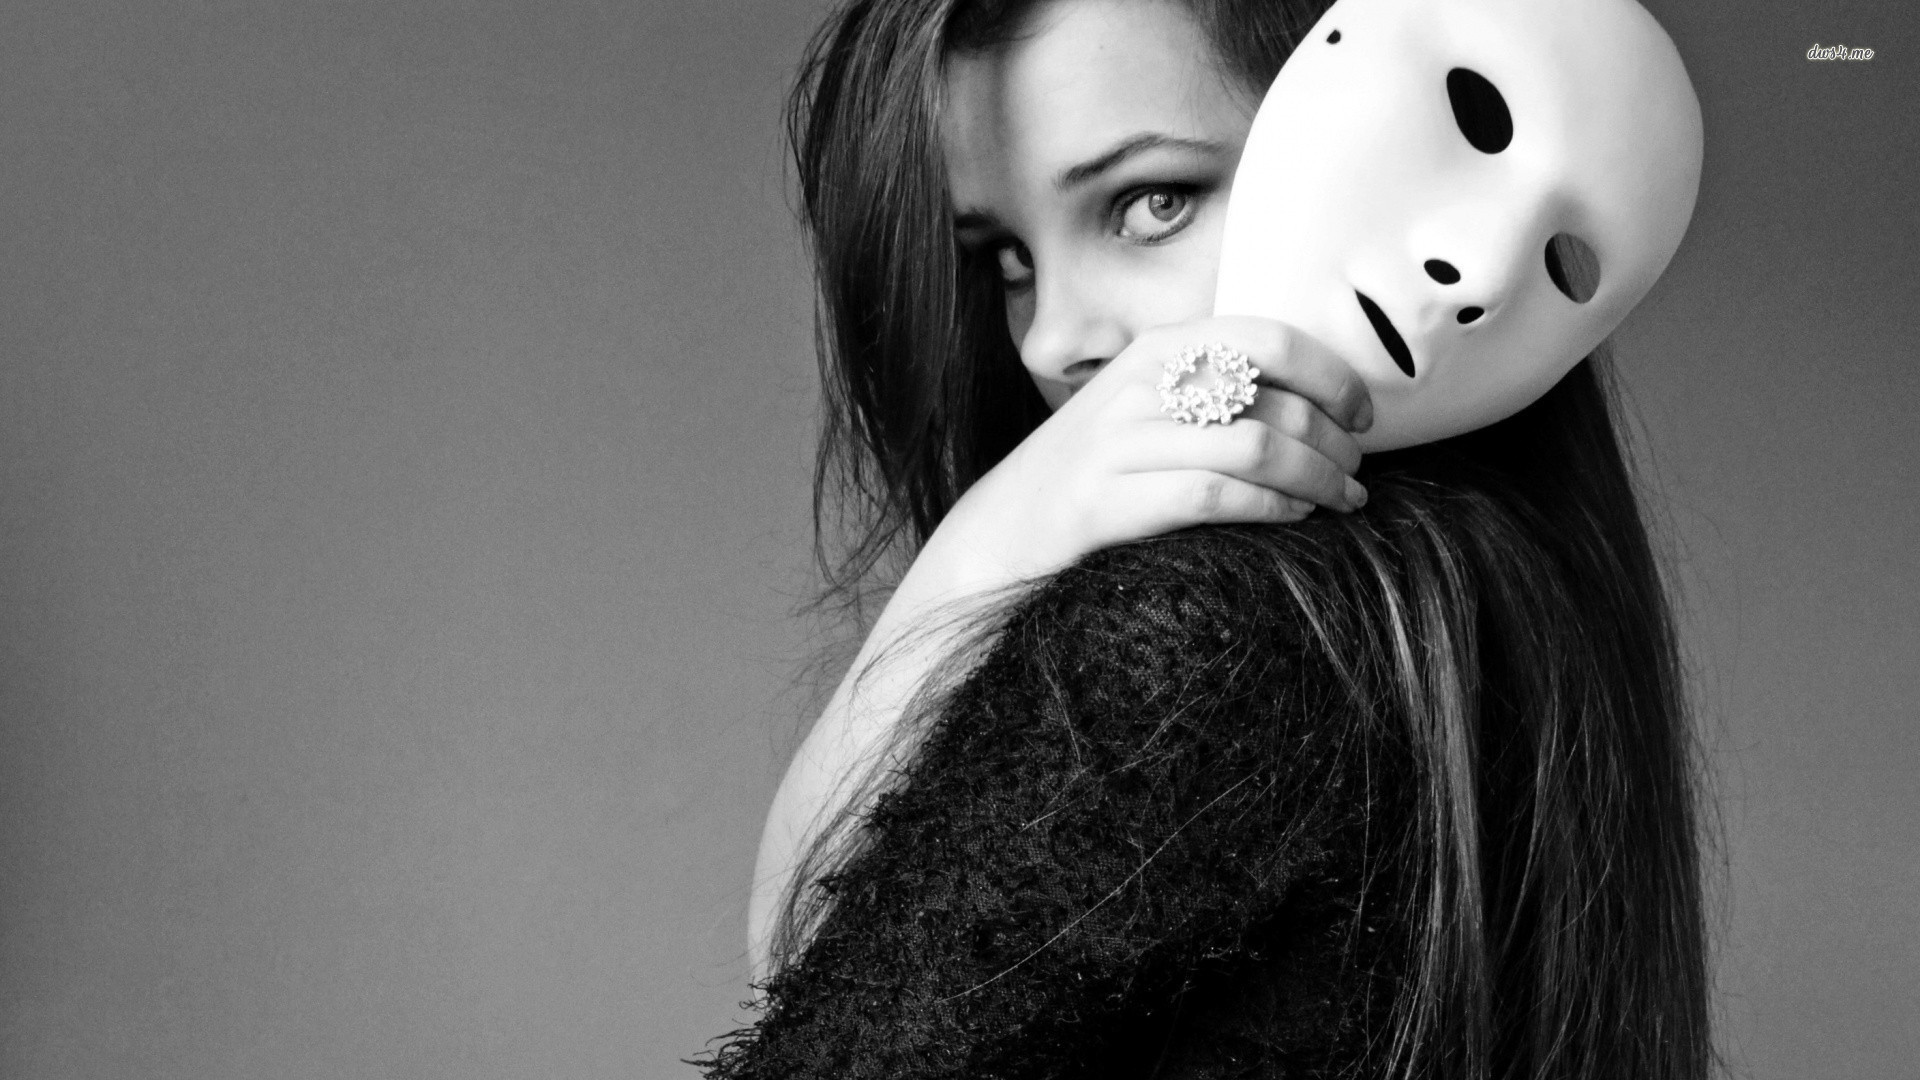 Girl with a white mask wallpaper - Photography wallpapers - #19160